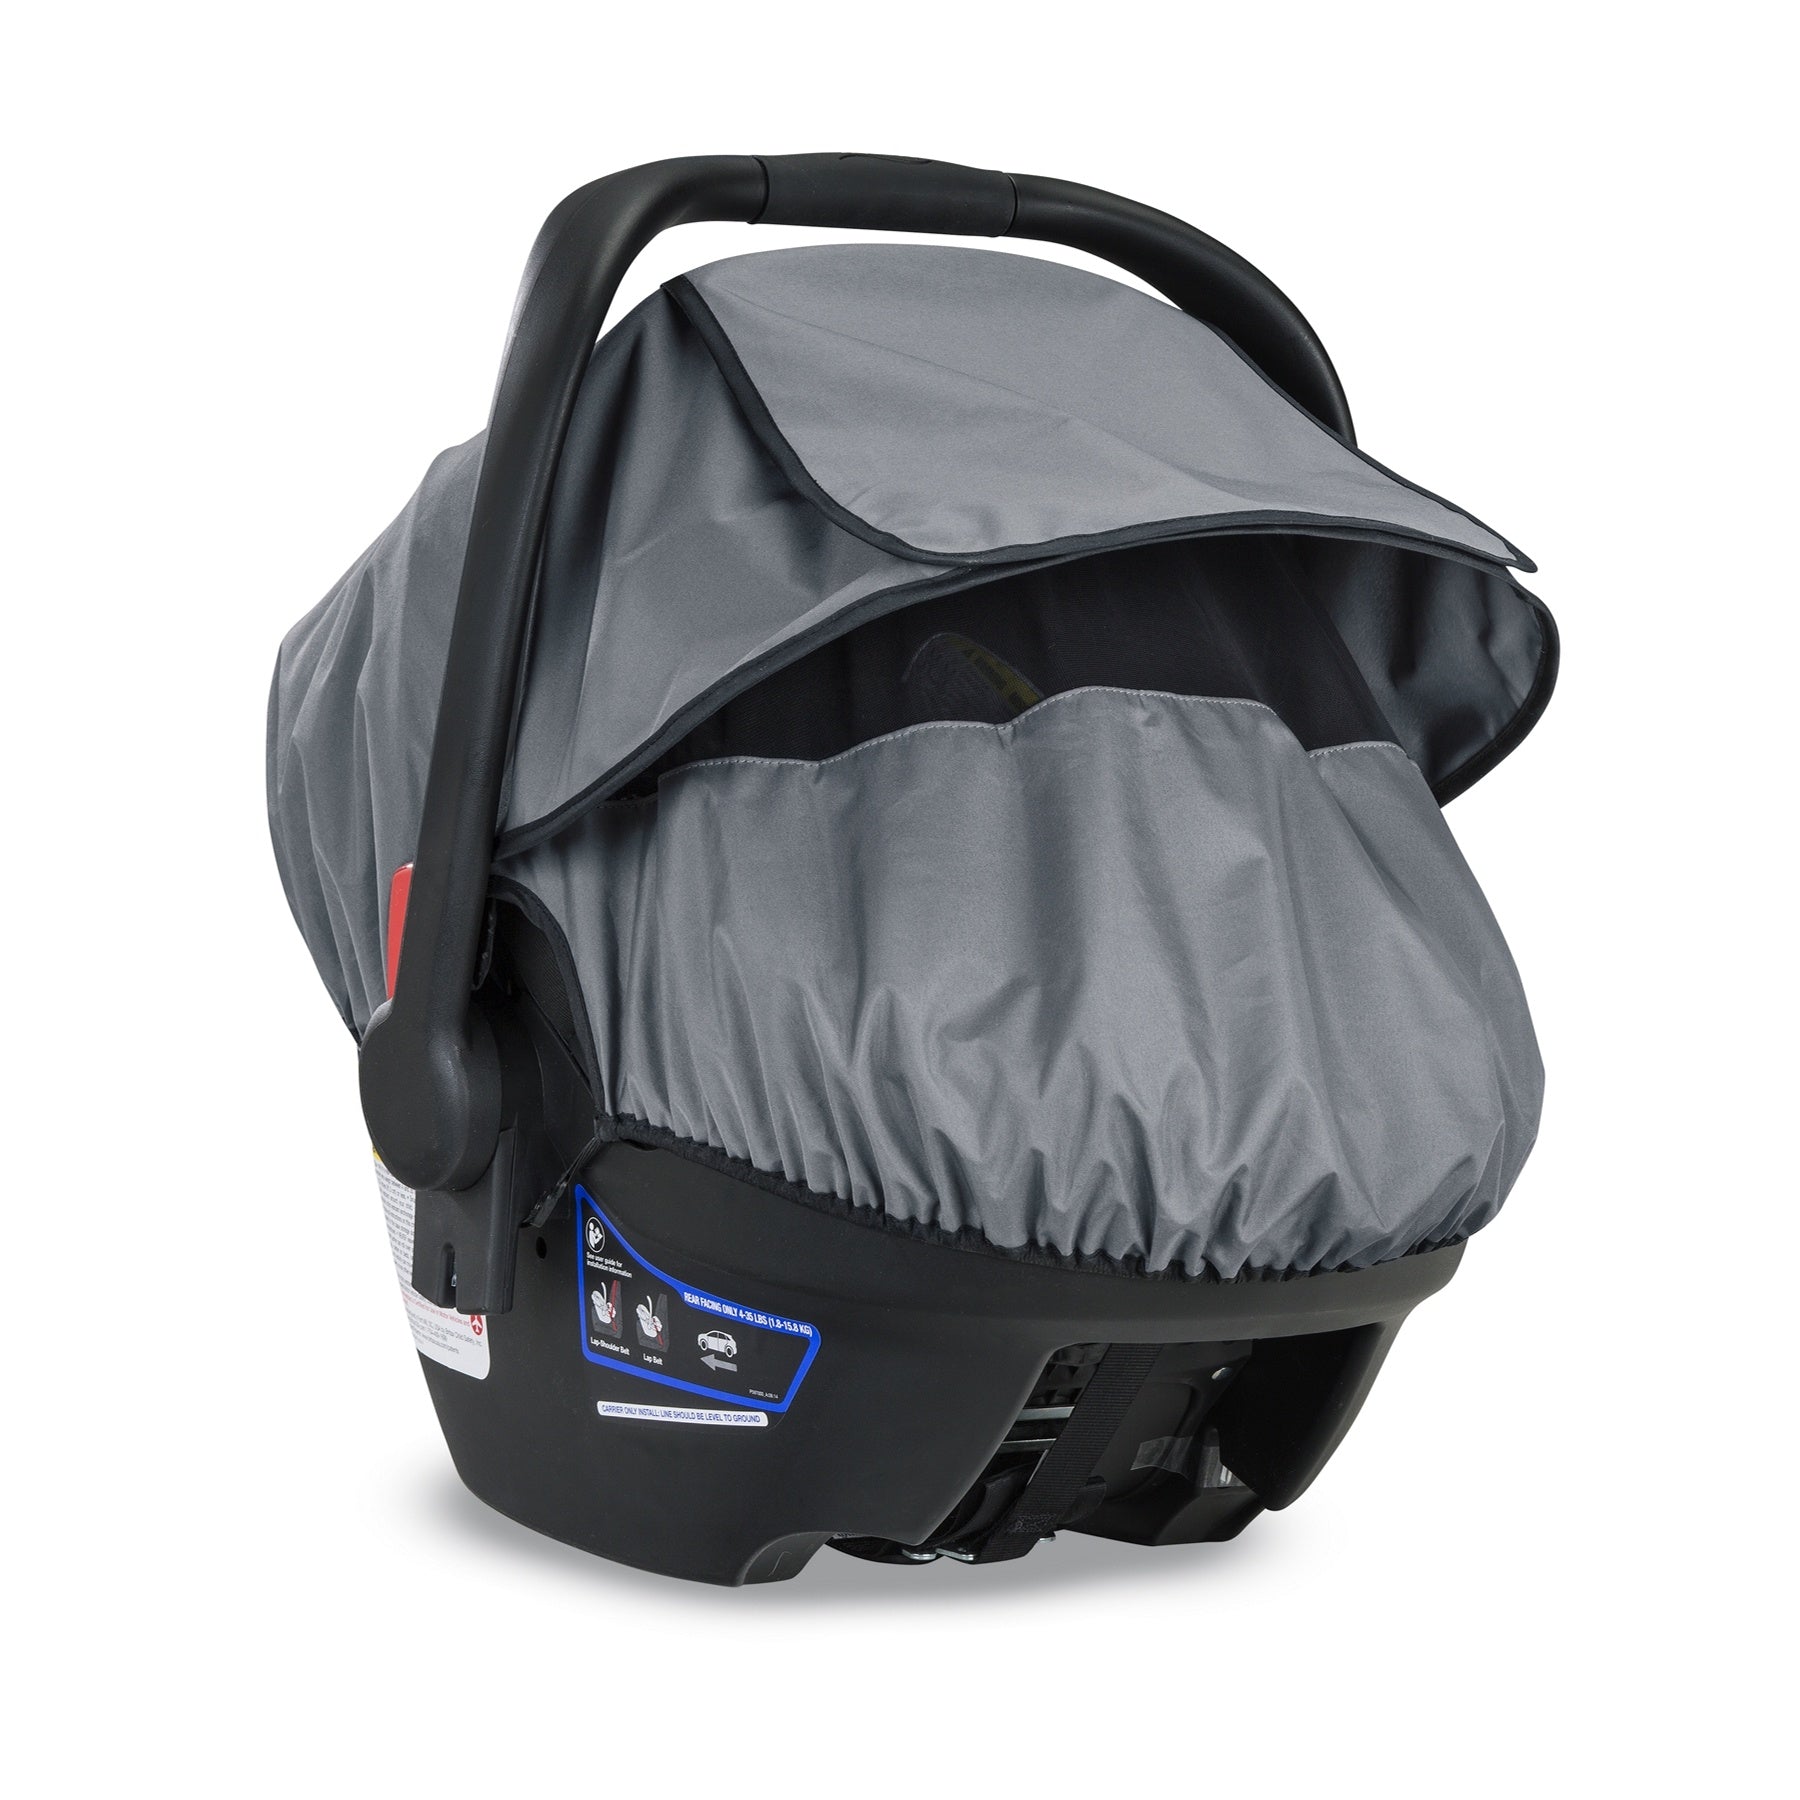 Britax B-COVERED All-Weather Infant Car Seat Cover